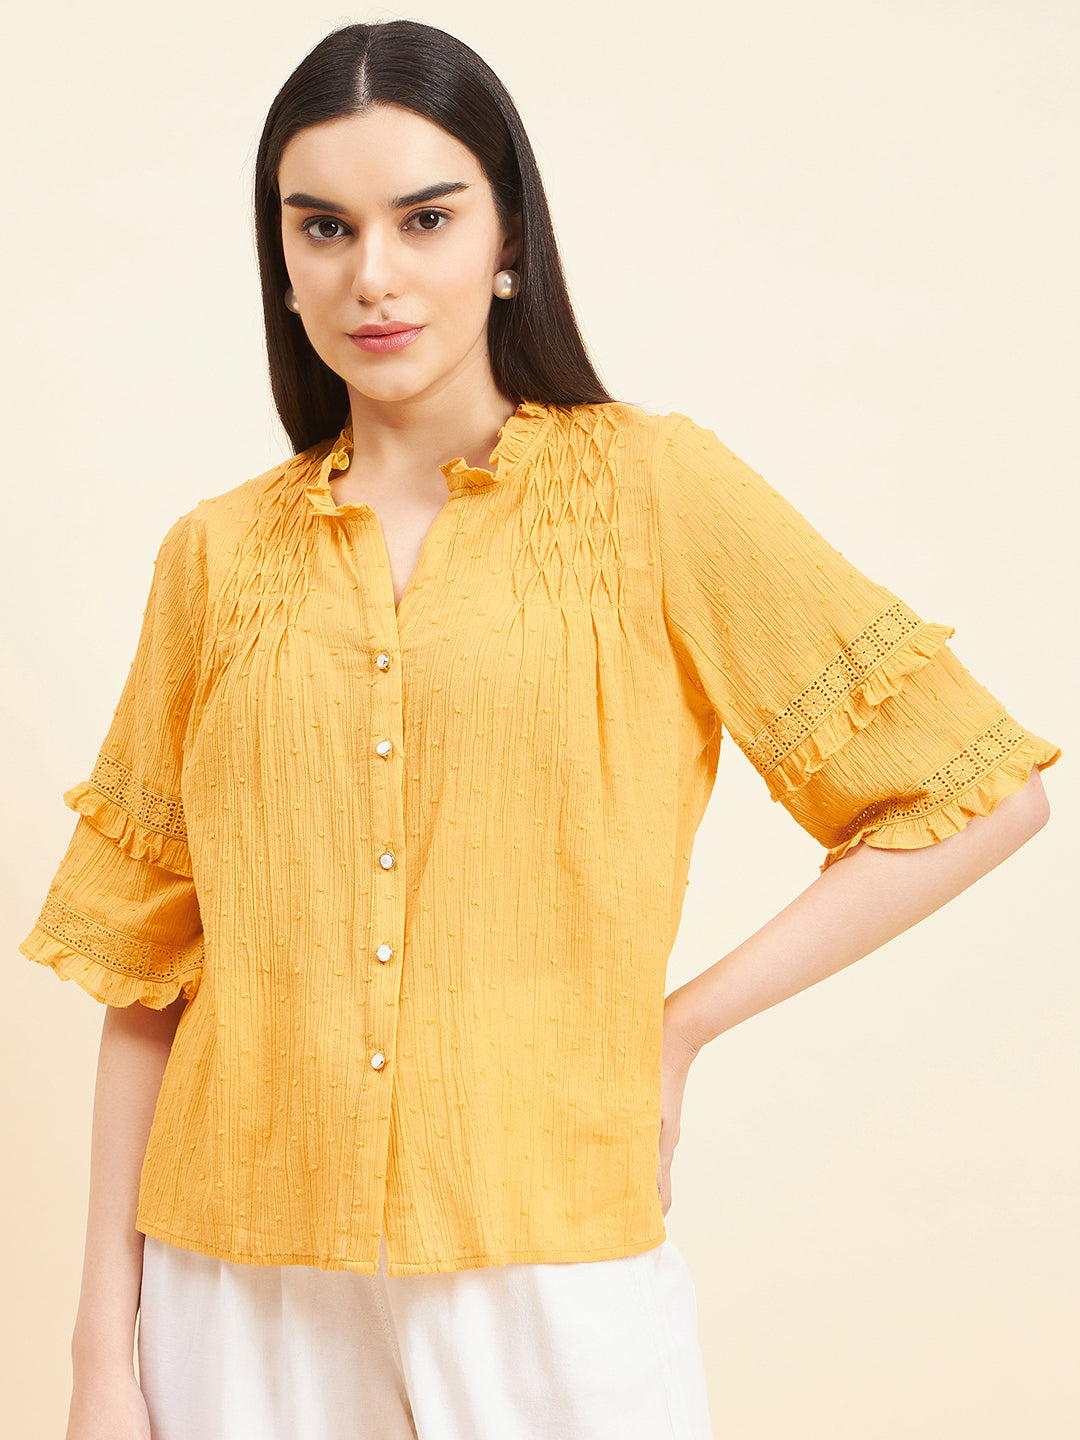 Gipsy Women Solid Lace Cotton Yellow Top